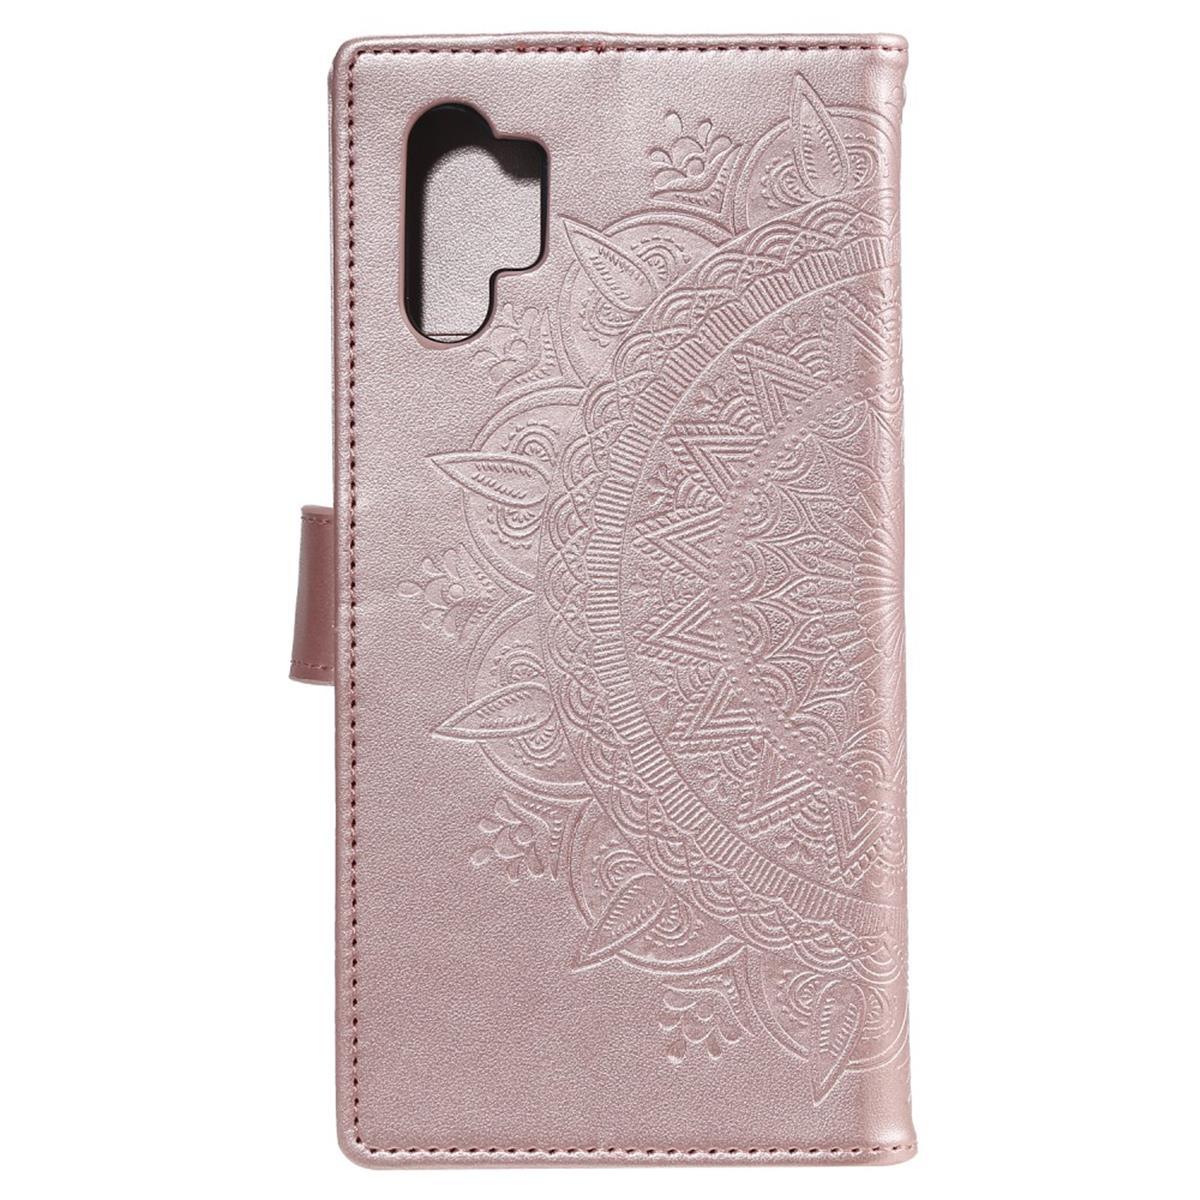 COVERKINGZ Klapphülle mit Mandala Muster, Bookcover, A32 4G, Samsung, Galaxy Roségold